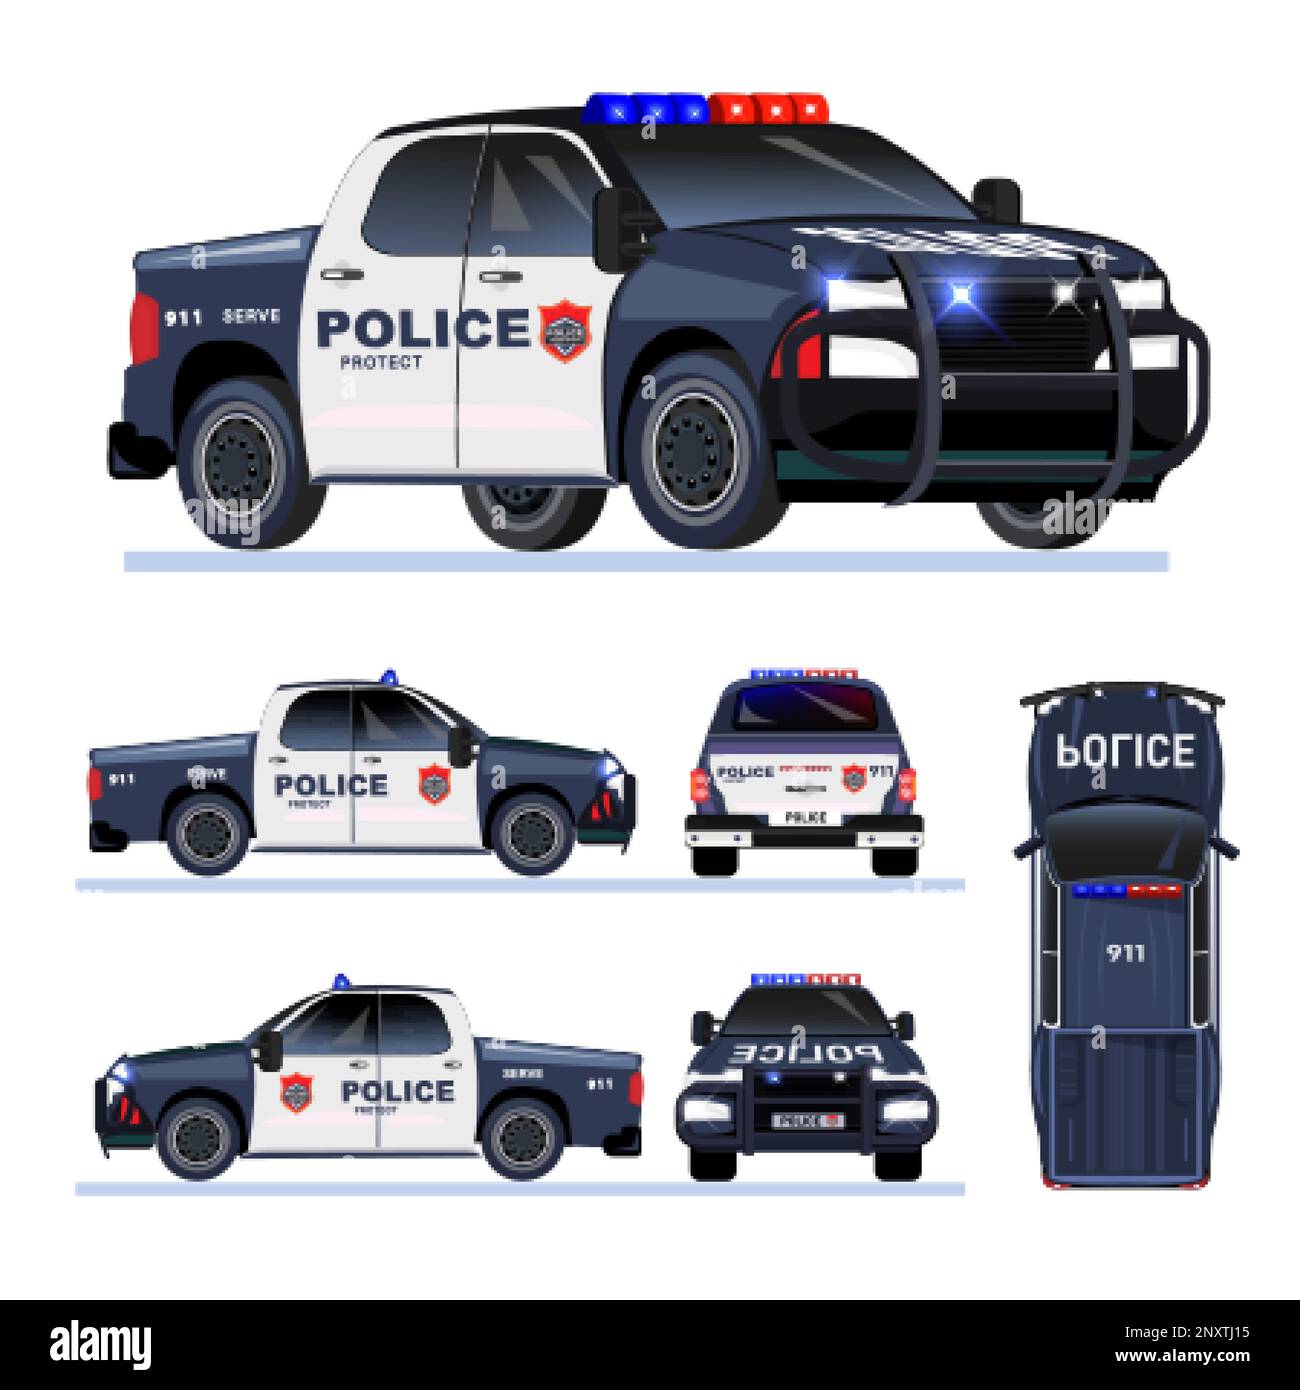 Police car from different angles top side back front views flat set isolated vector illustration Stock Vector